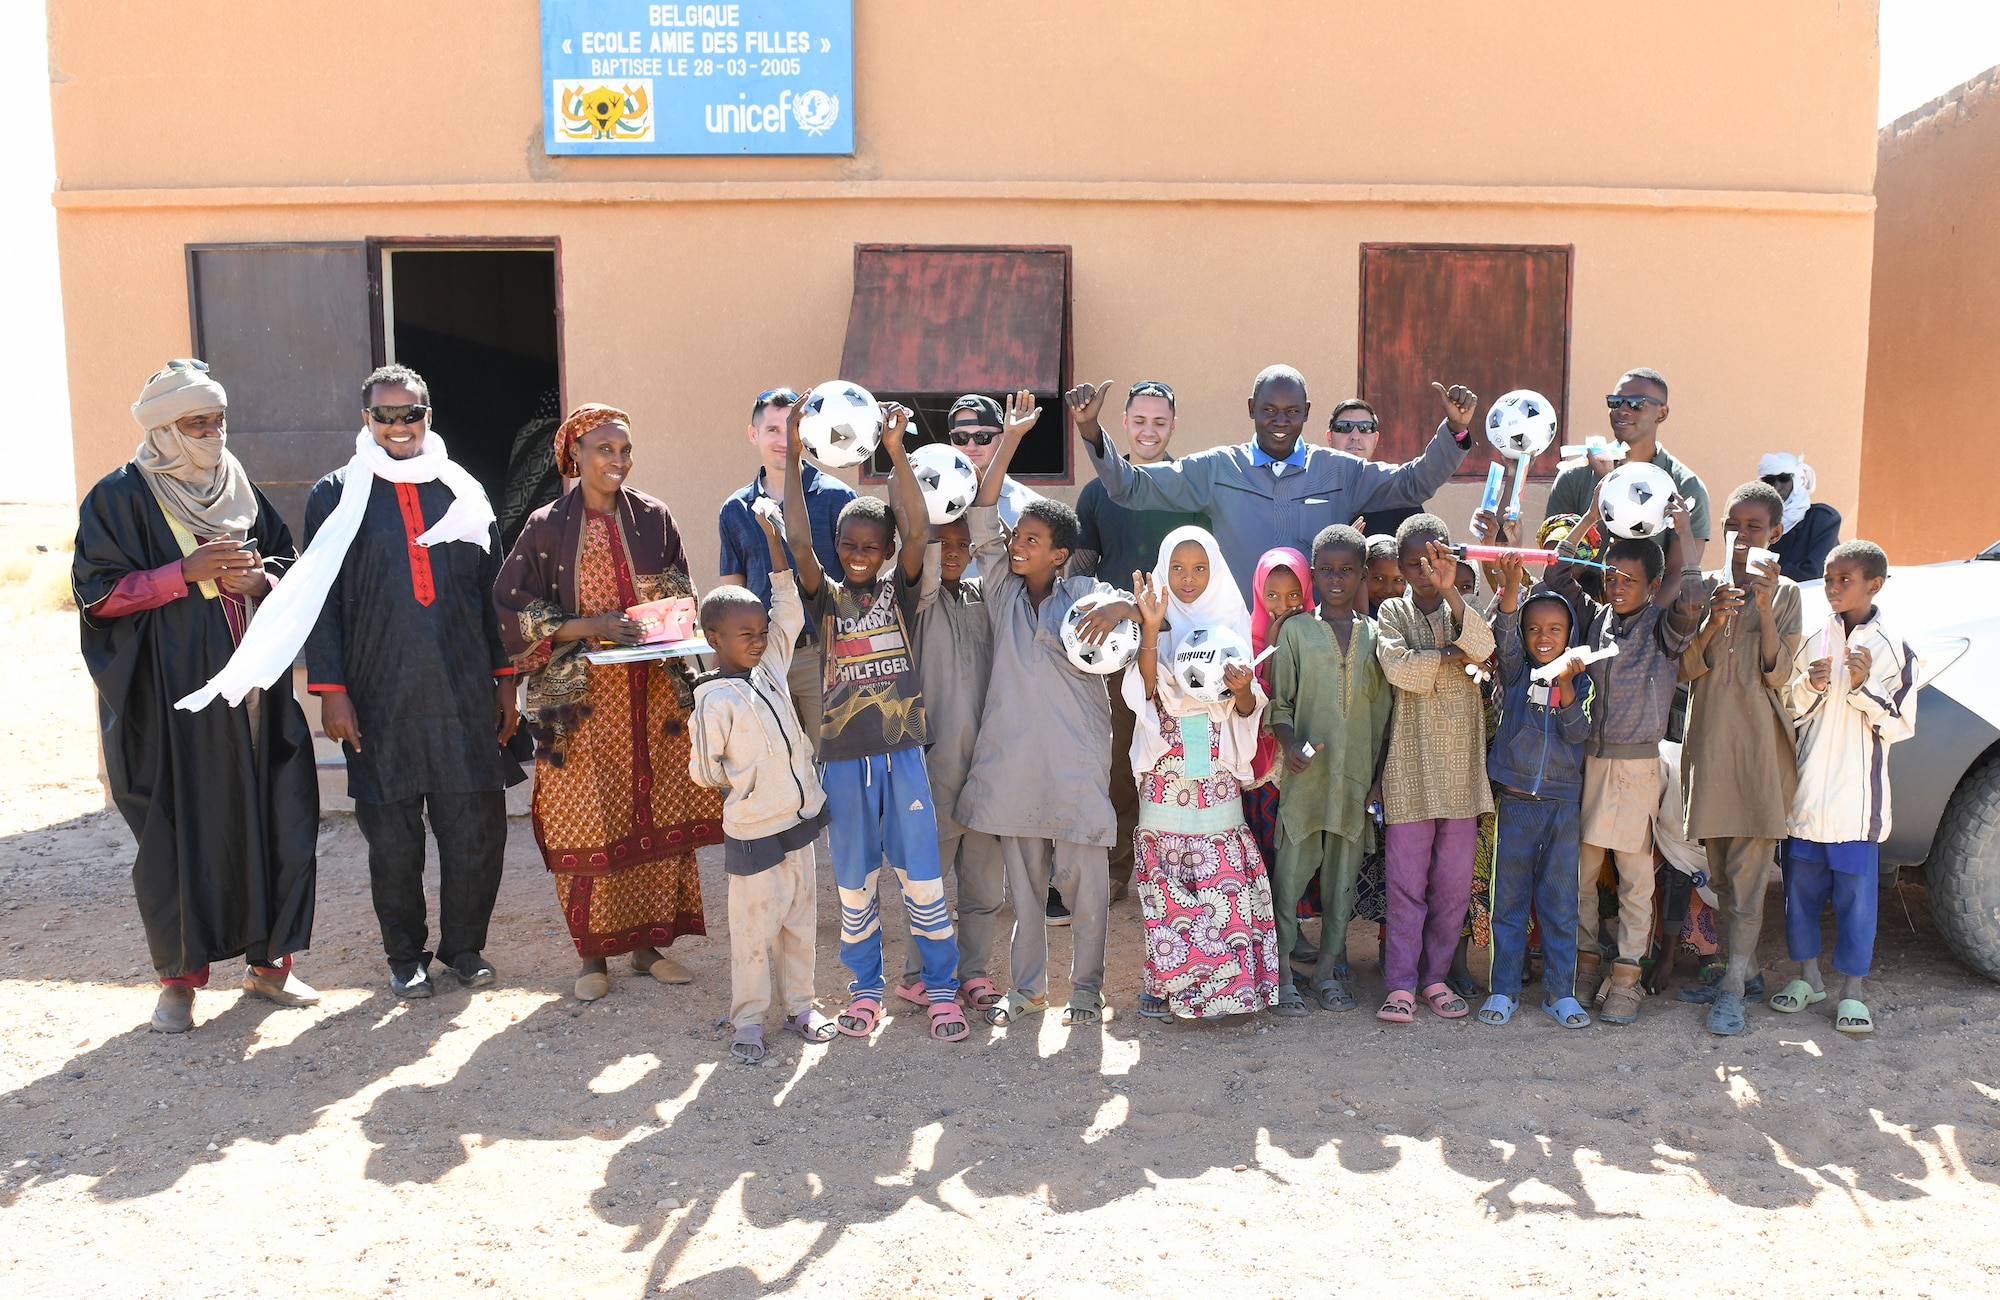 U.S. Airmen and Soldiers along with local dignitaries, students and healthcare providers take a group photo in commemoration of the first ever dental hygiene course in the village of Tsakatalam, Niger, Dec. 14, 2019. The U.S. Army 443rd Civil Affairs Battalion Civil Affairs Team 219 deployed to Nigerien Air Base 201 partnered with local Agadez city dentist, Dr. Mahaman Aicha, to teach the Tsakatalam Primary School students for the first time how to properly brush and floss their teeth and the importance of good oral health. (U.S. Air Force photo by Staff Sgt. Alex Fox Echols III)